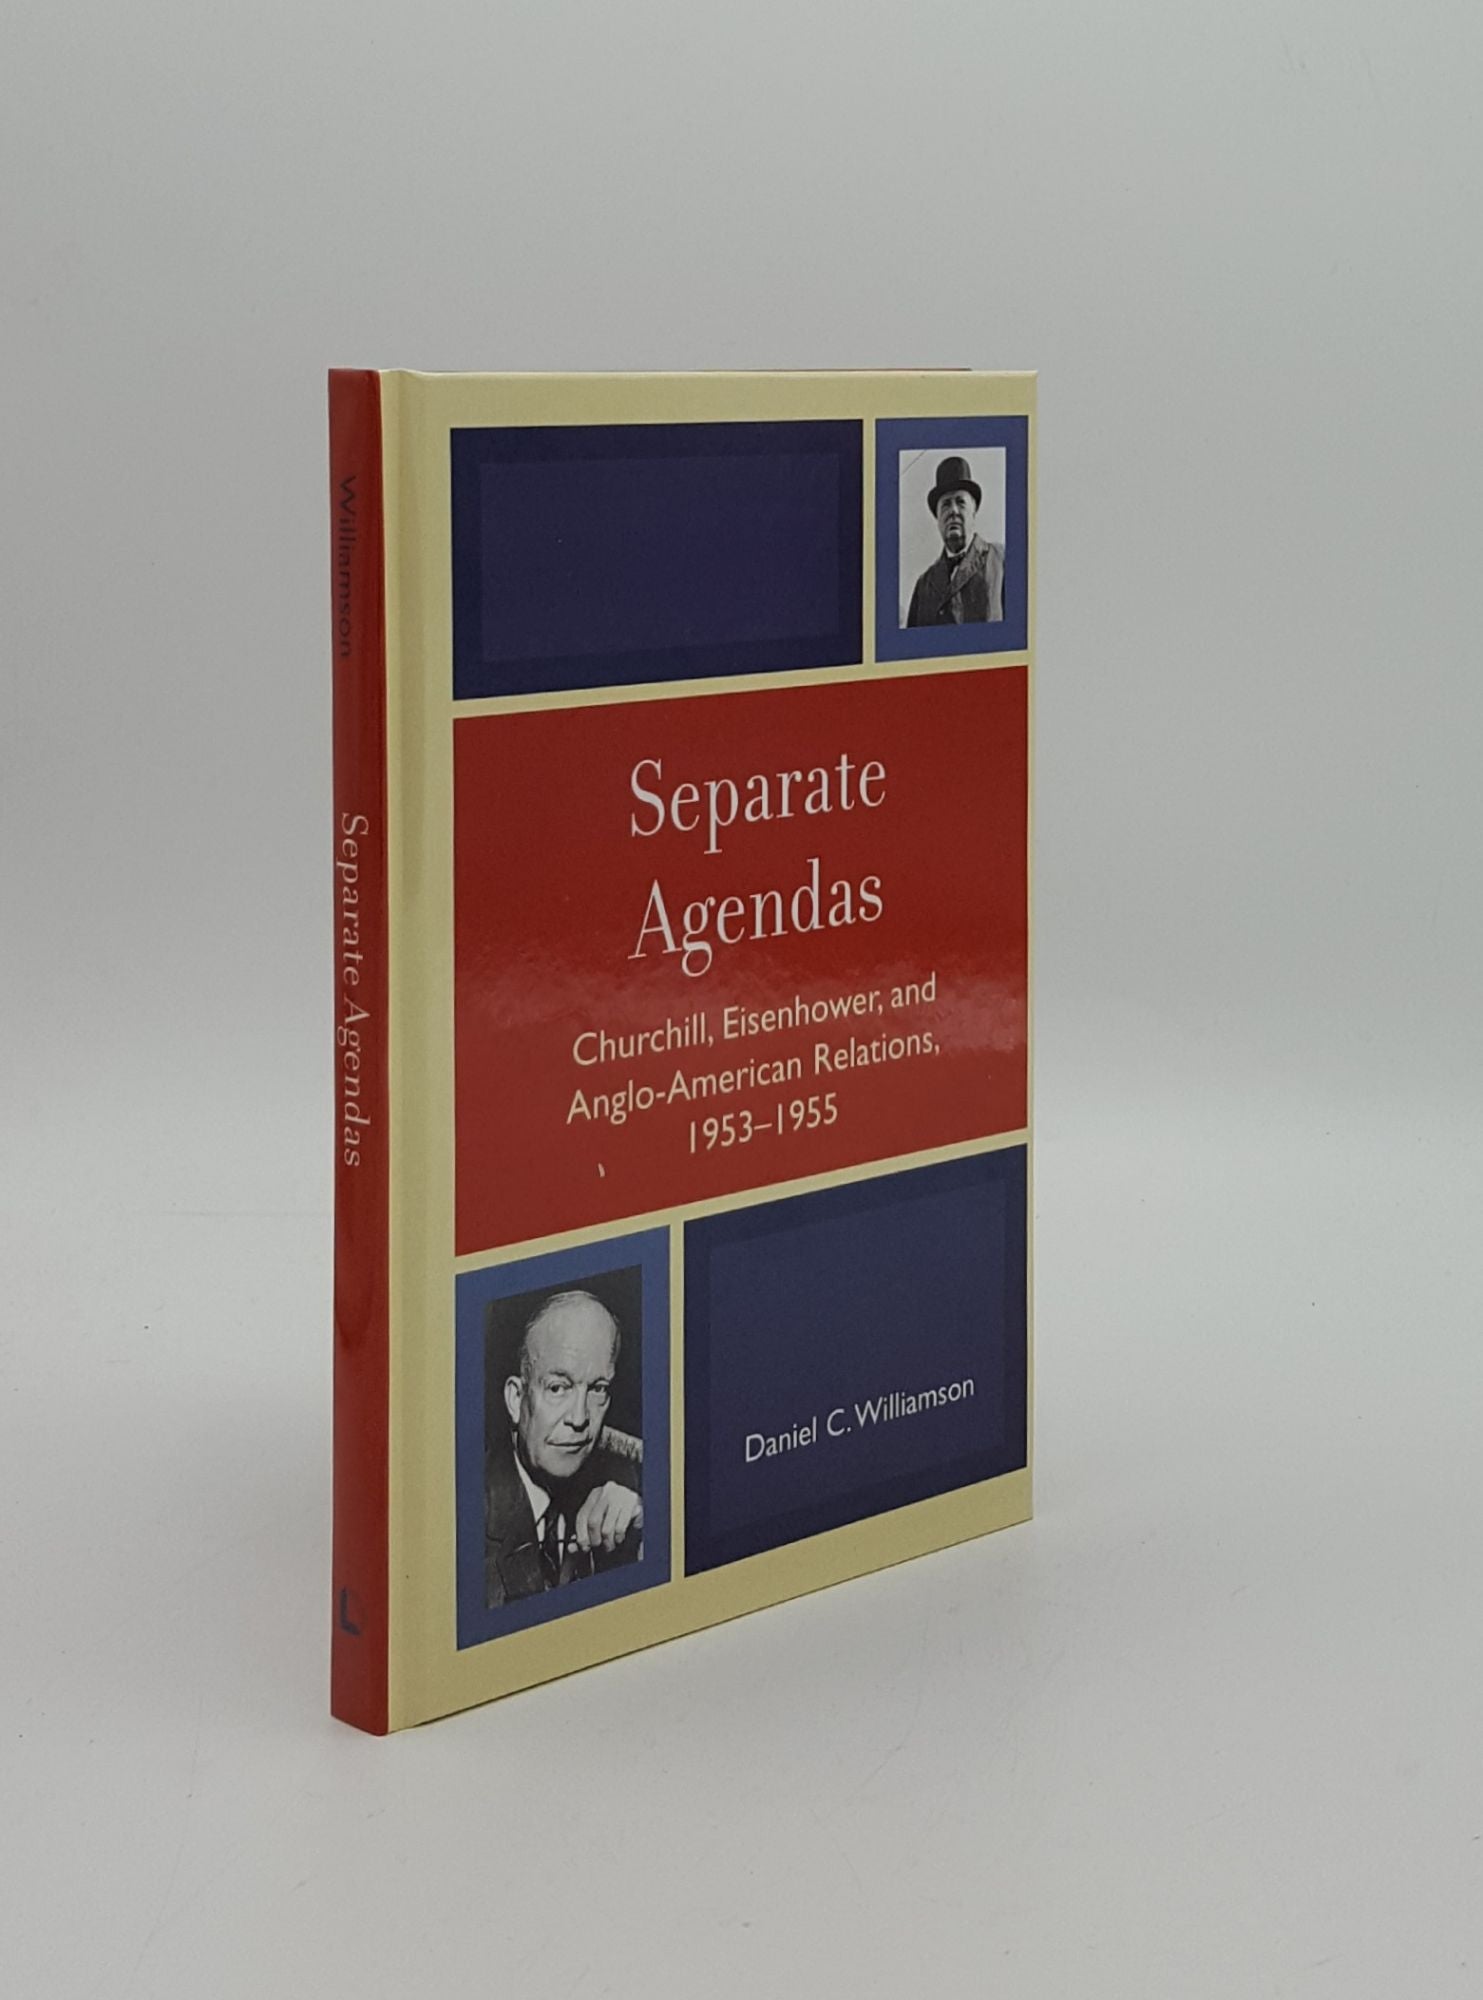 WILLIAMSON Daniel C. - Separate Agendas Churchill Eisenhower and Anglo-American Relations 1953-1955